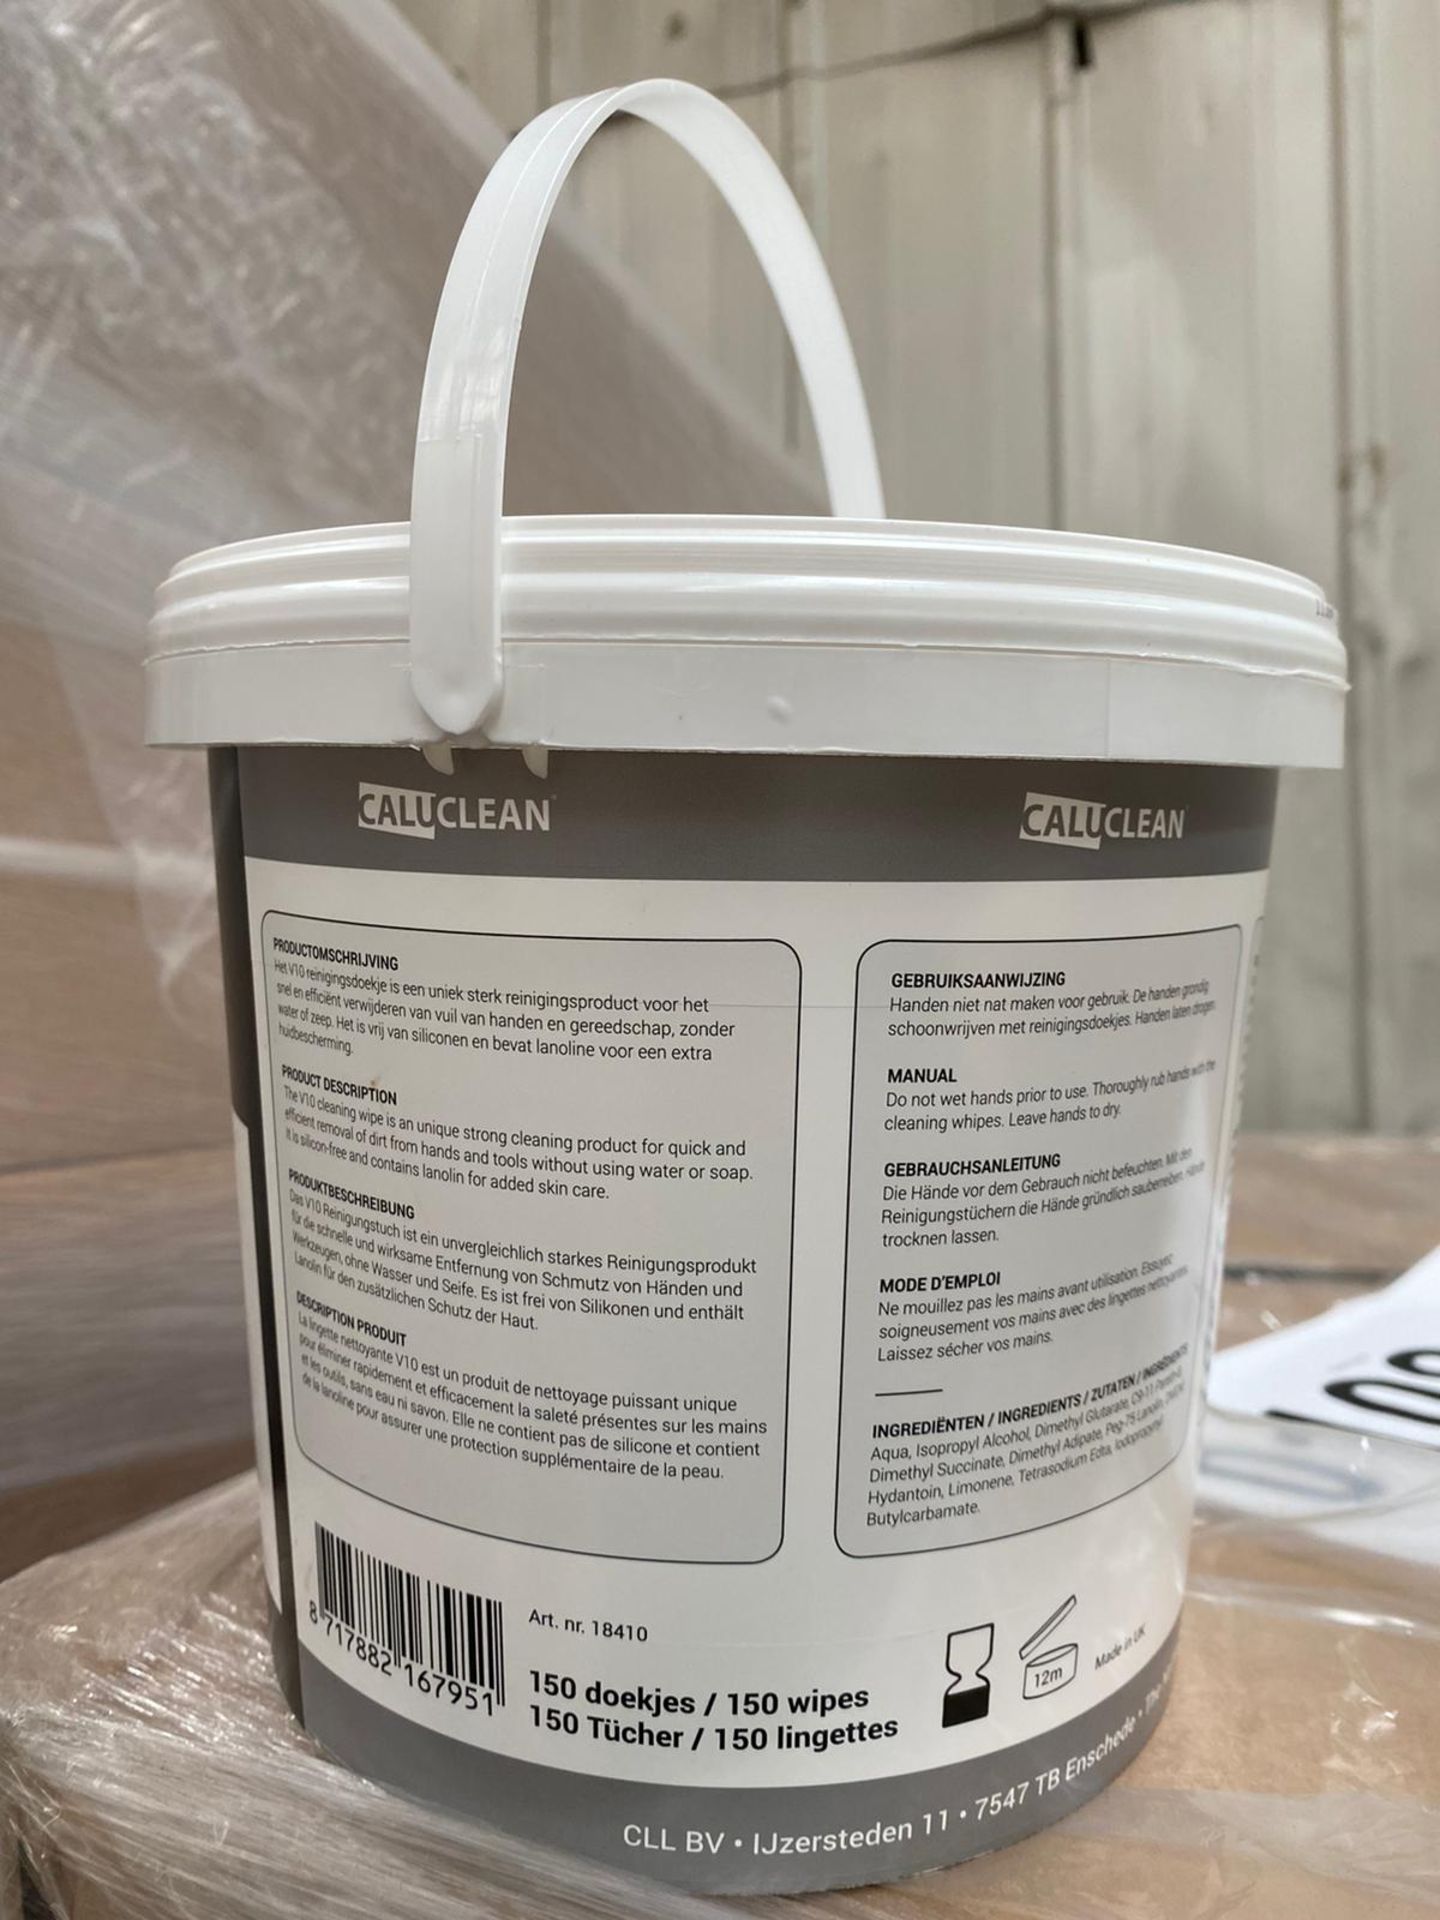 CALECLEAN V10 CLEANING WIPES (150 WIPES IN A BUCKET) 192 BUCKETS ON PALLET - Image 2 of 3